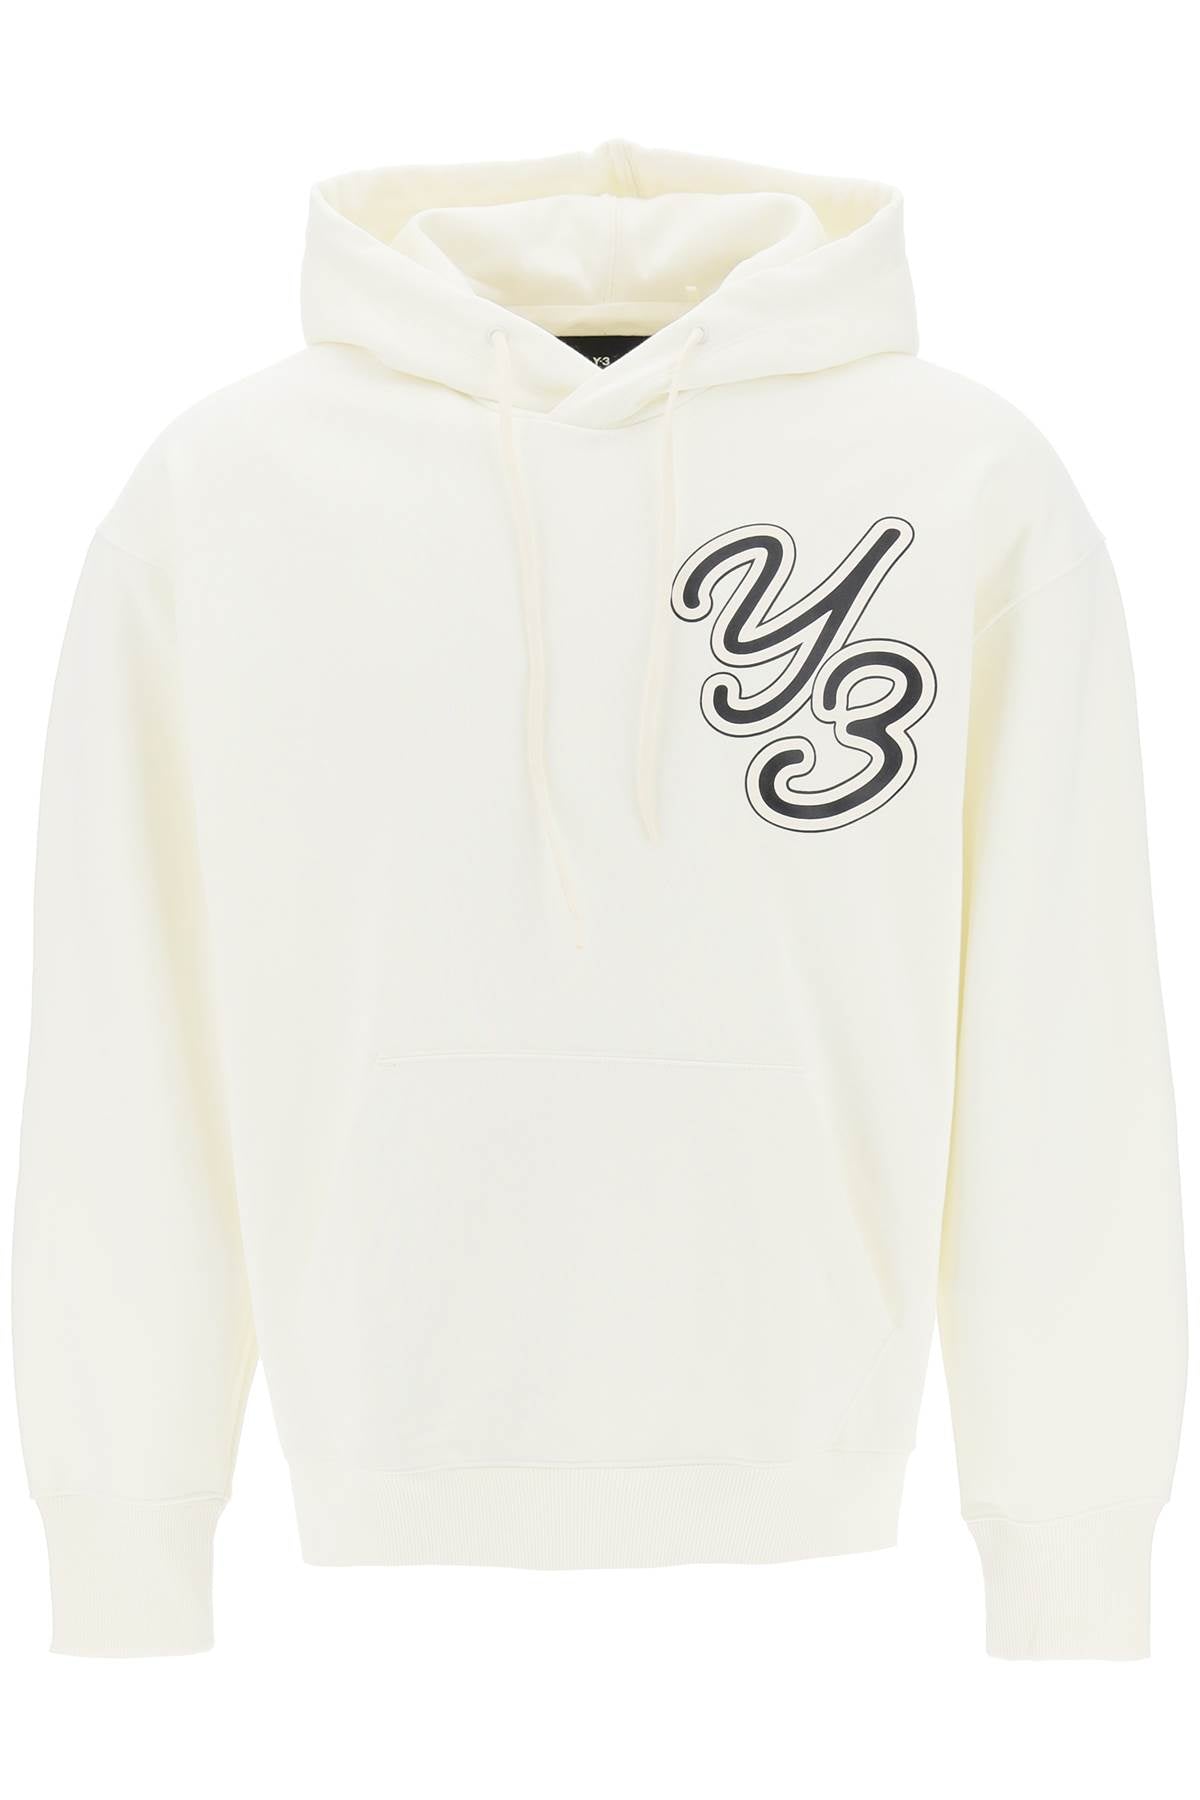 Y-3 hoodie with logo print IT7524 OFF WHITE